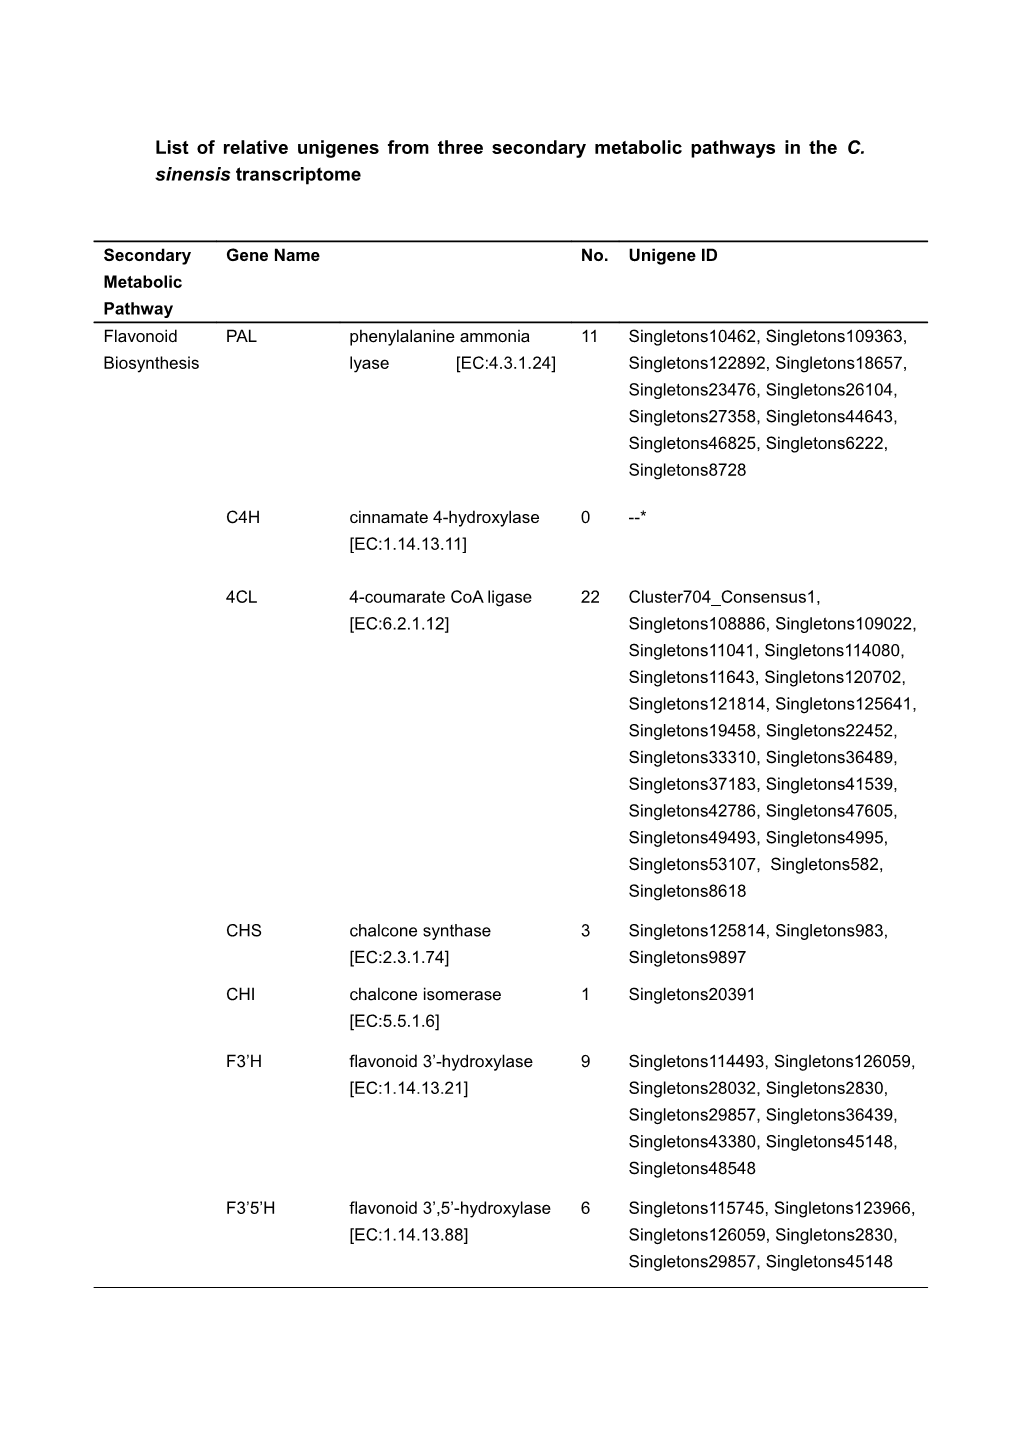 List of Relative Unigenes from Three Secondary Metabolic Pathways in the C. Sinensis